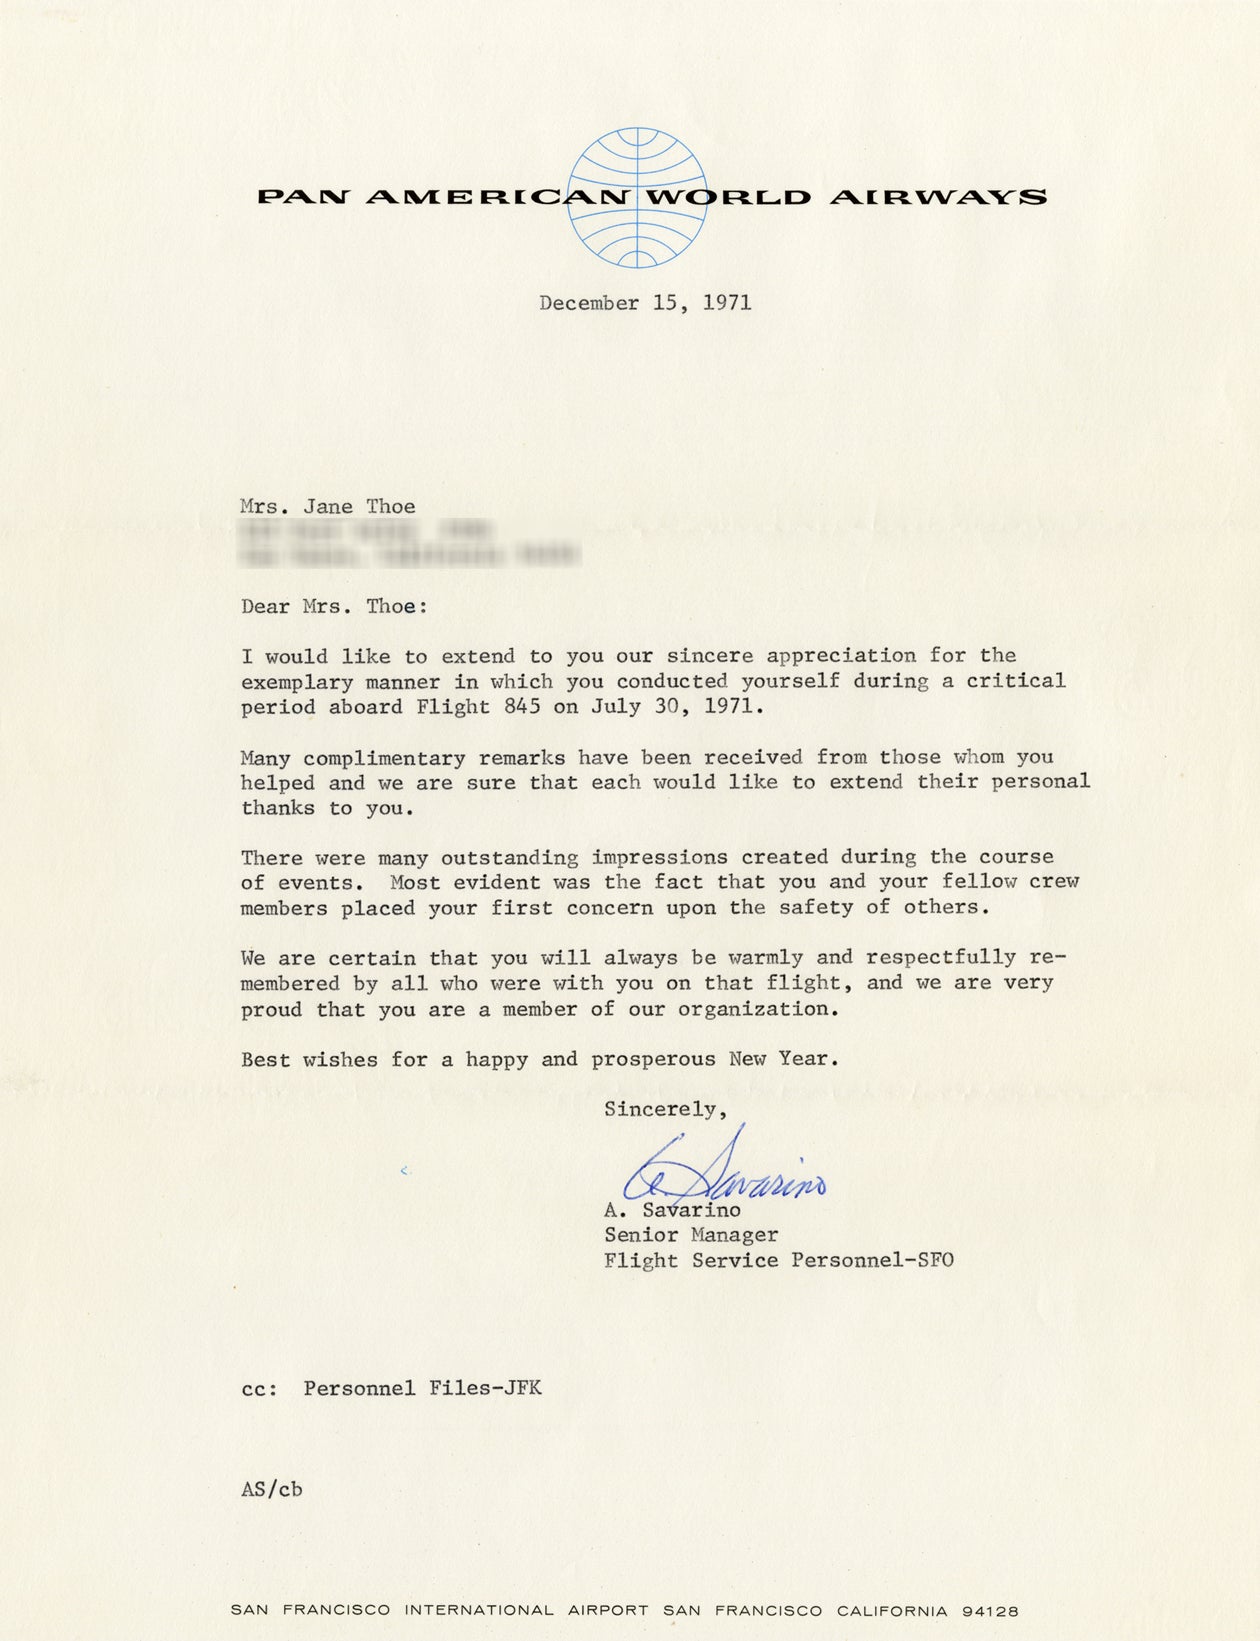 Commendation letter addressed to Jane Thoe from Alfonso Savarino, senior manager of flight service personnel–SFO  December 15, 1971